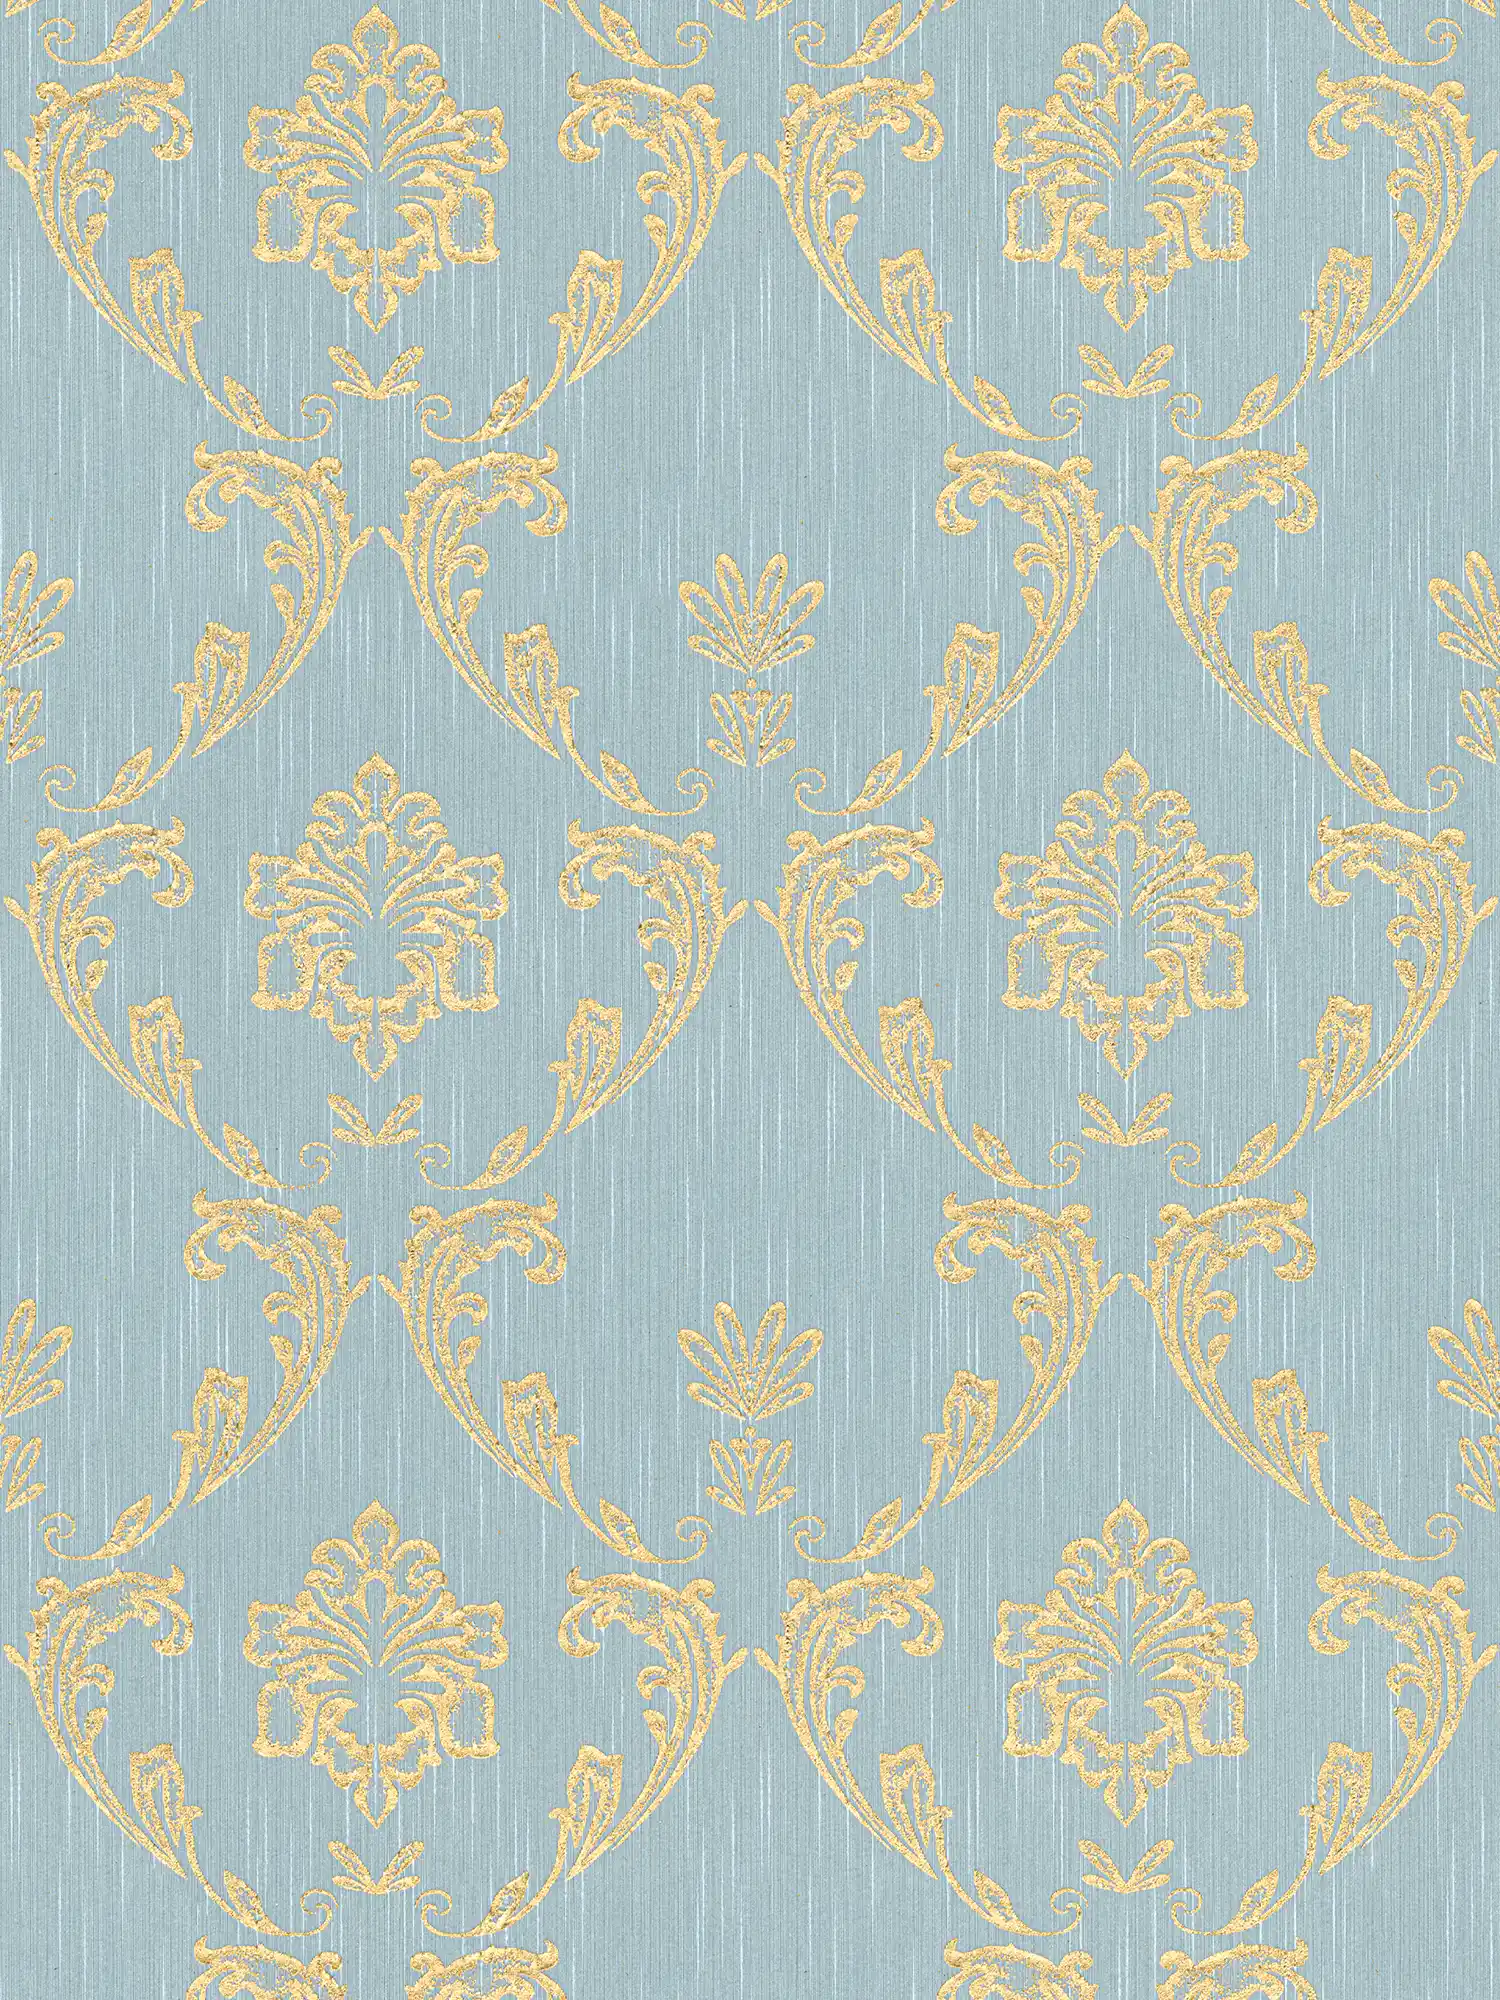         Ornamental wallpaper with floral elements in gold - gold, blue, green
    